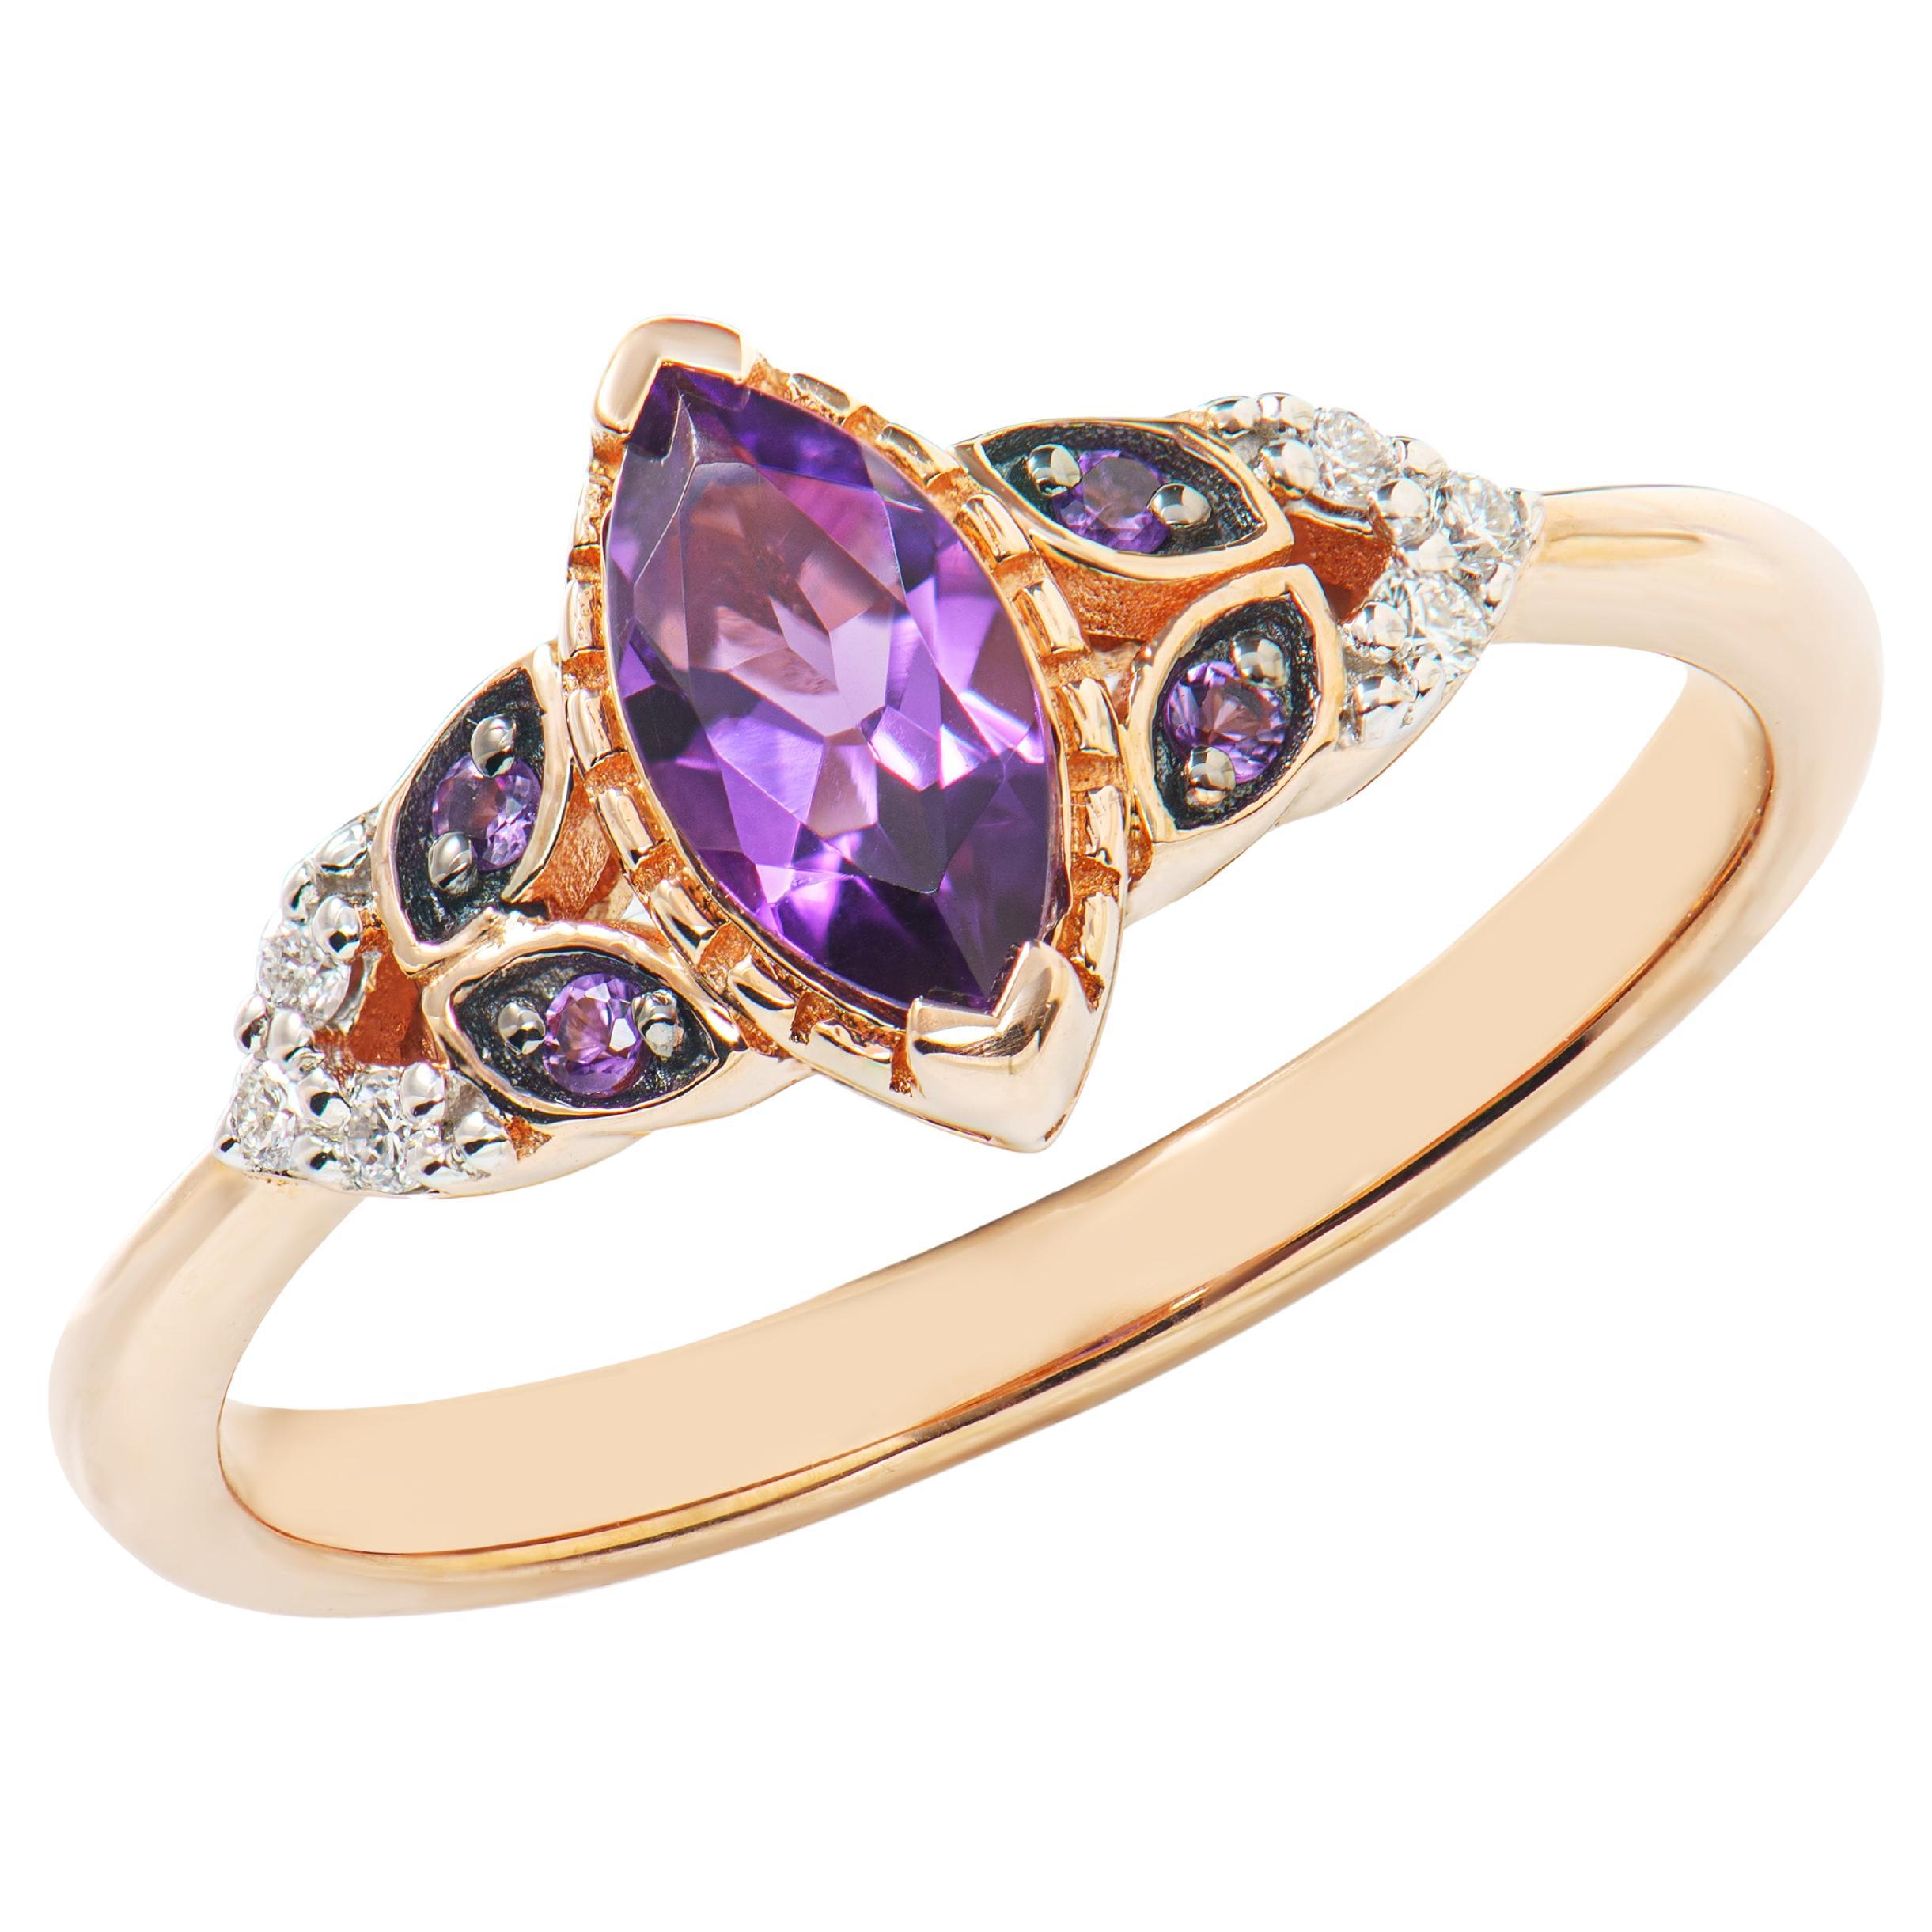 0.45 Carat Amethyst Fancy Ring in 14Karat Rose Gold with White Diamond.   For Sale